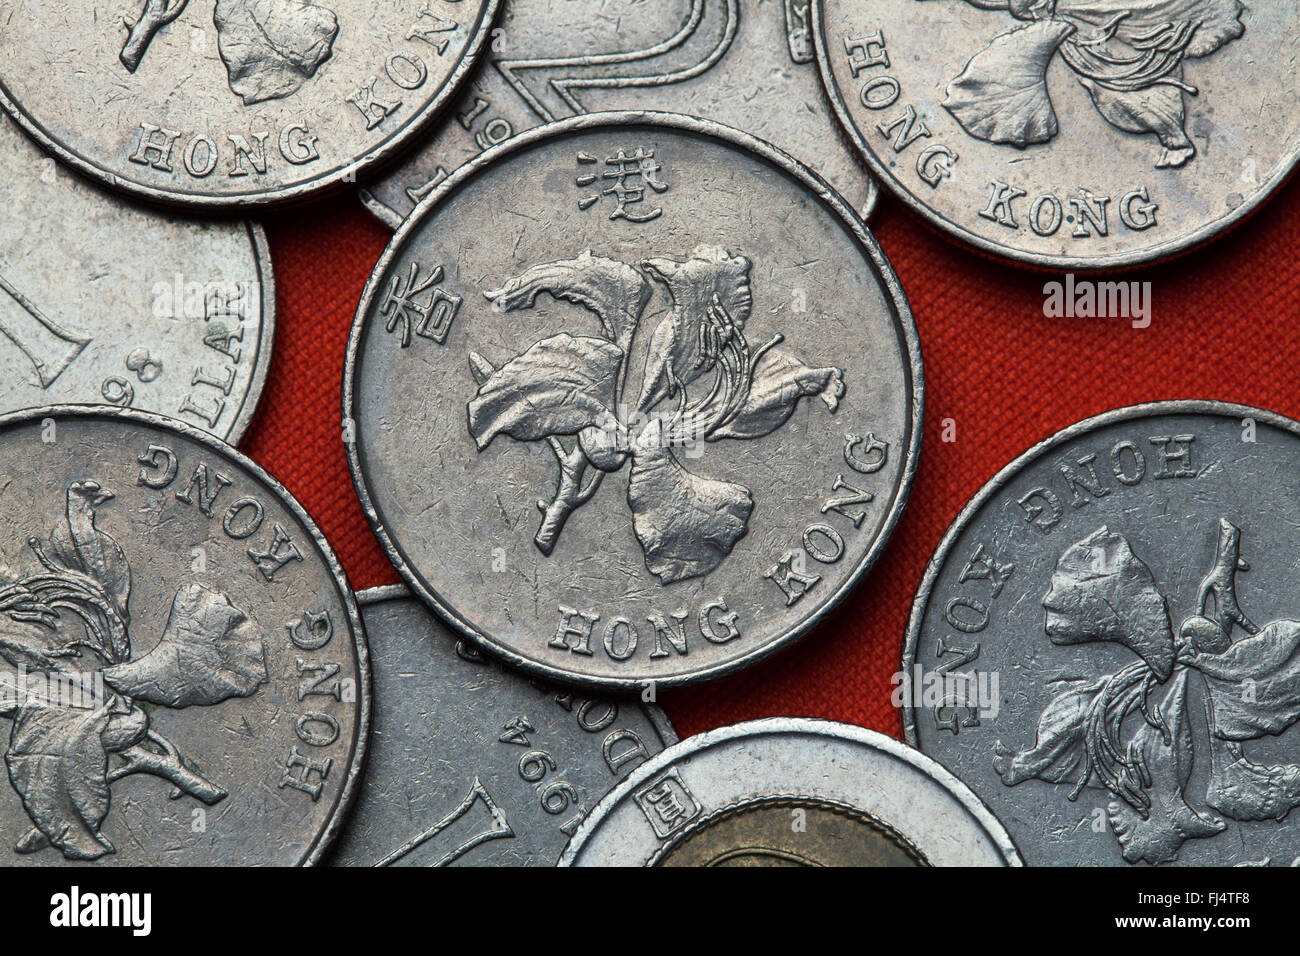 Coins of Hong Kong. Flowers of bauhinia blakeana also known as Hong Kong orchid depicted in the Hong Kong dollar coins. Stock Photo